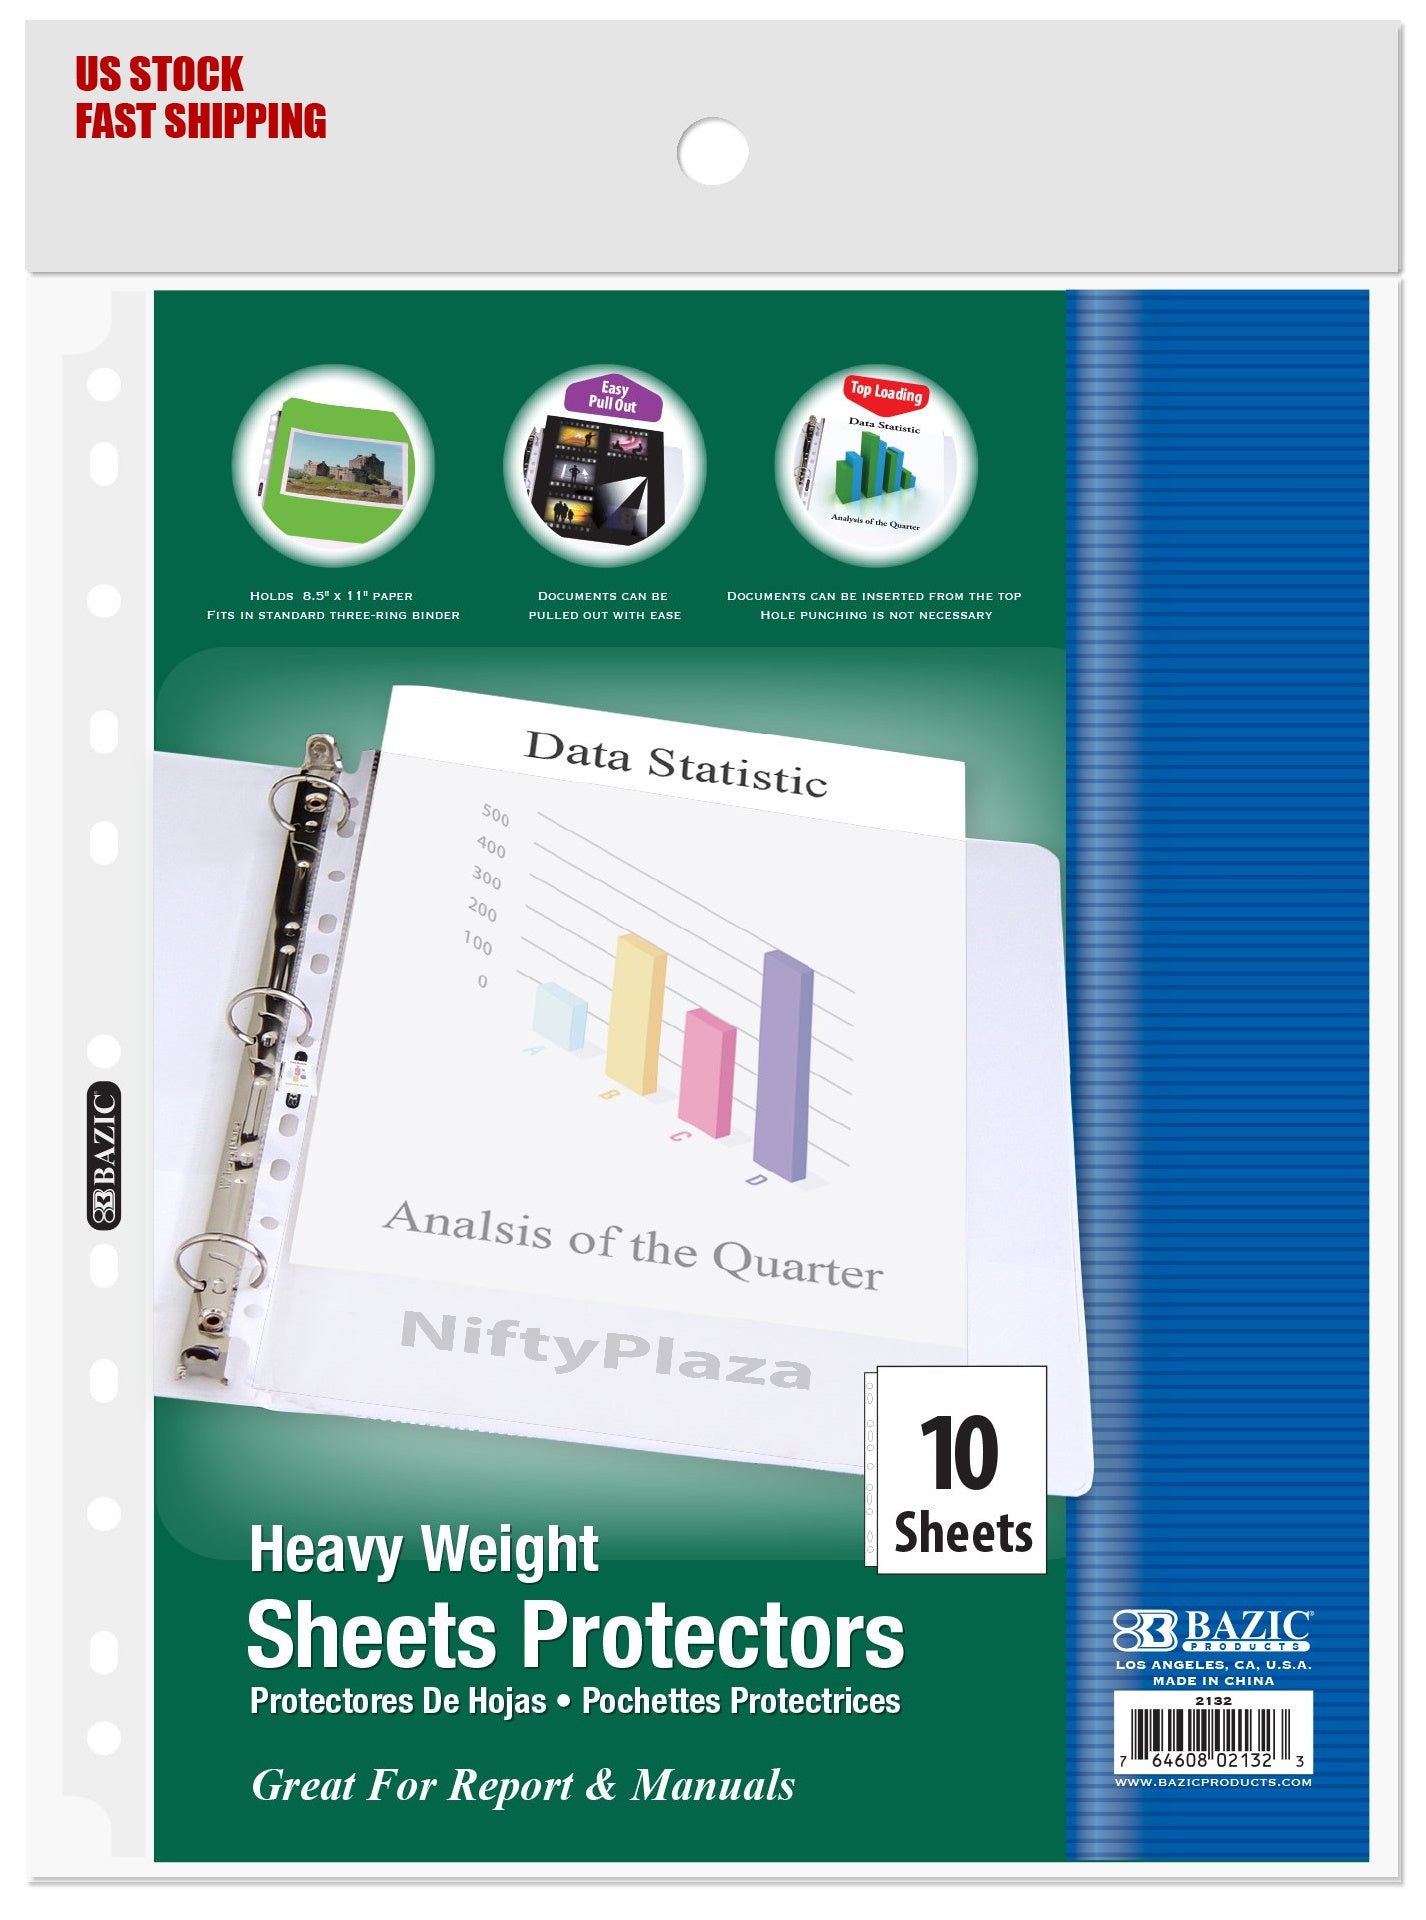 Heavy Weight Top Loading Sheet Protectors (10/Pack) - Protect your papers Holds 8.5" x 11" paper